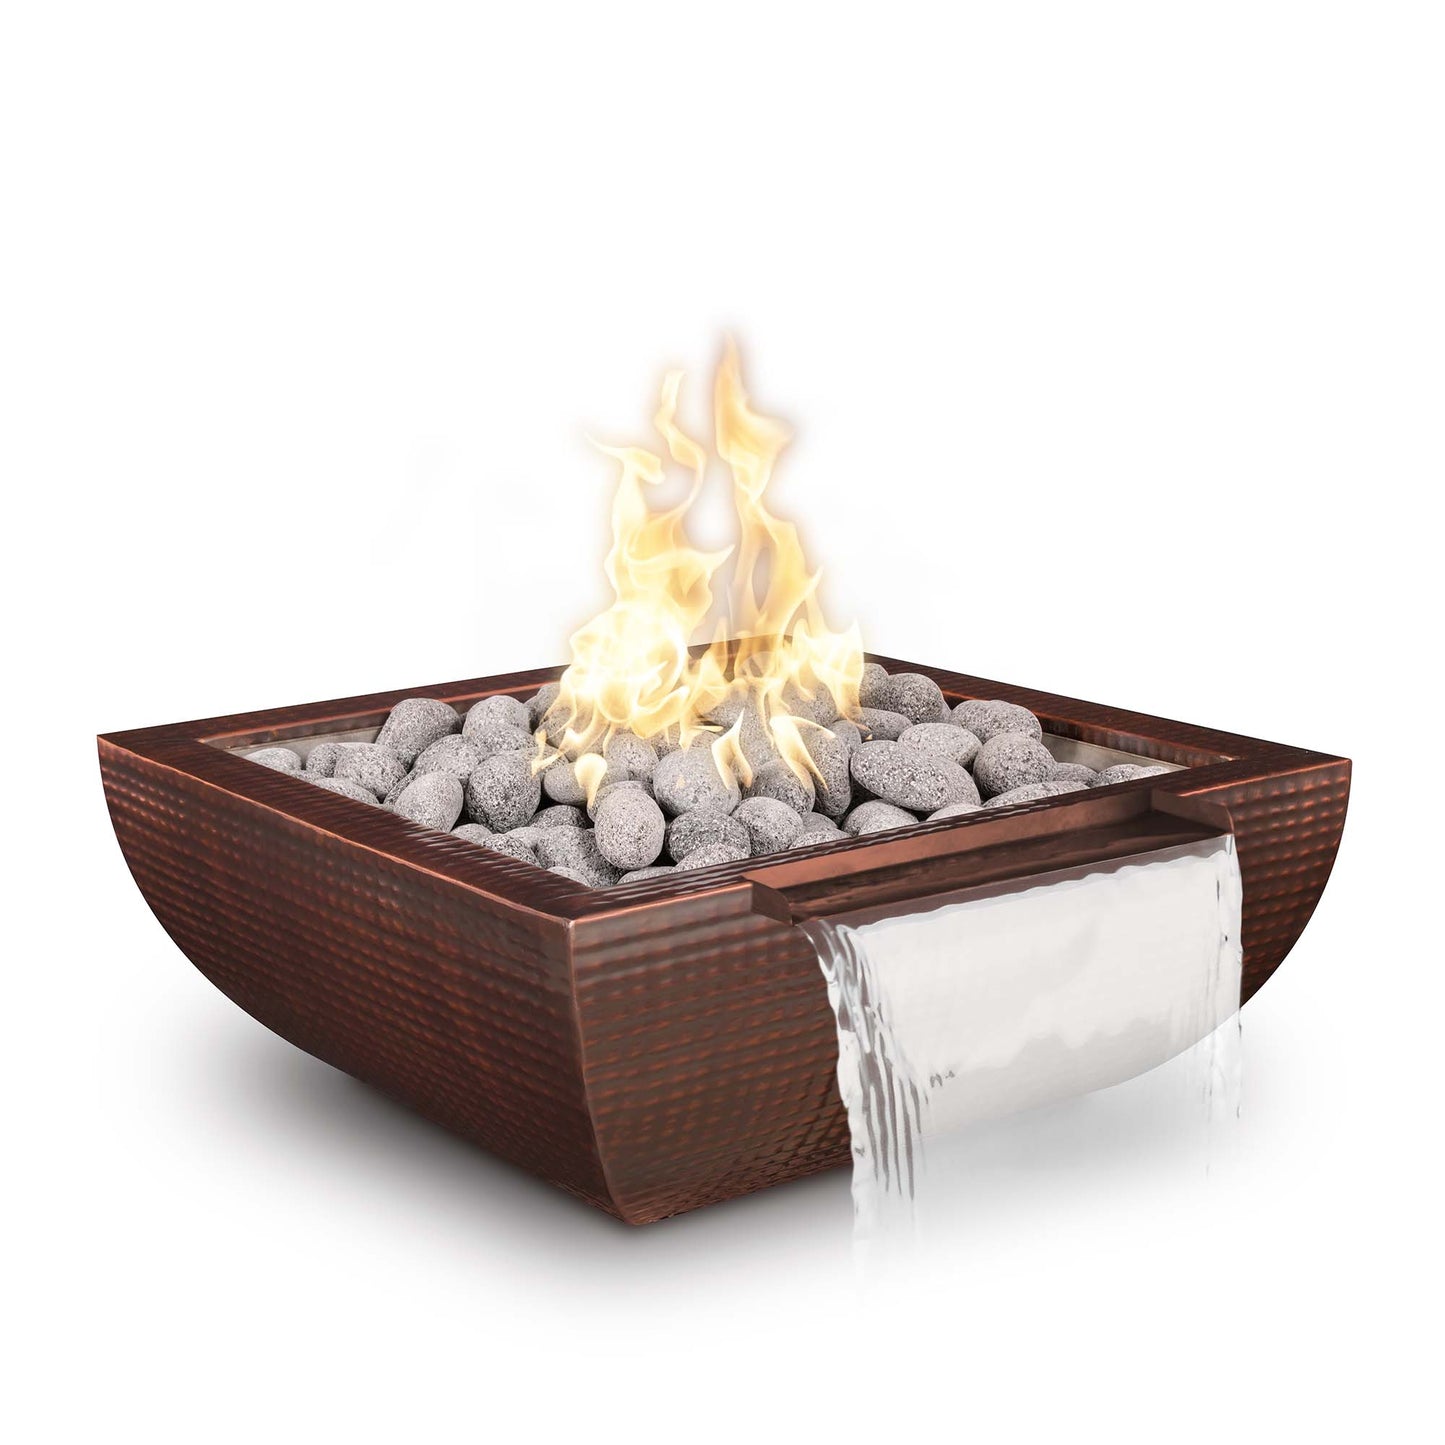 The Outdoor Plus Avalon Wide Spill 24" Silver Vein Powder Coated Metal Liquid Propane Fire & Water Bowl with Match Lit Ignition